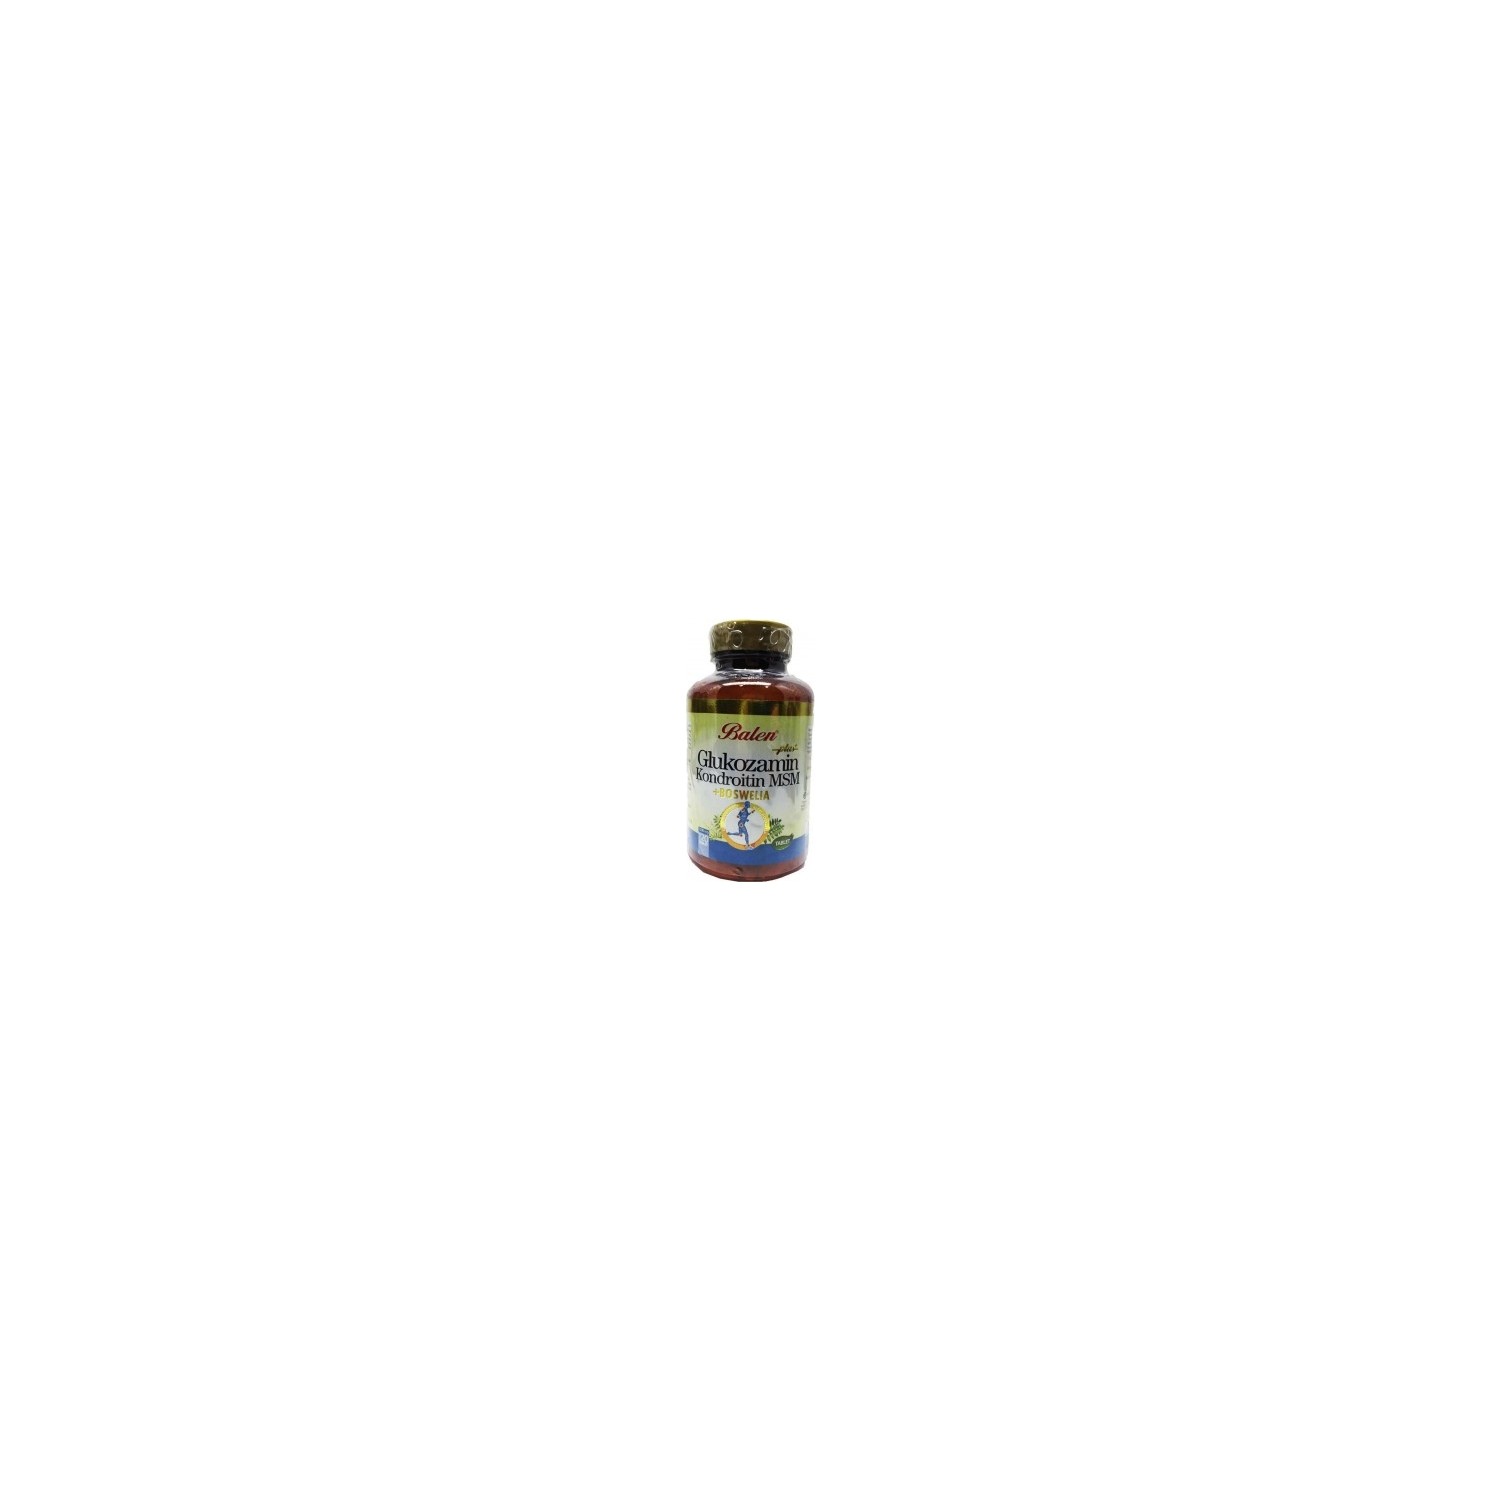 Активная добавка глюкозамин Balen Capsule, 120 капсул, 1200 мг nutralife glucosamine chondroitin sulfate 180caps healthy joint function cartilage ligaments mobility flexibility osteoarthritis